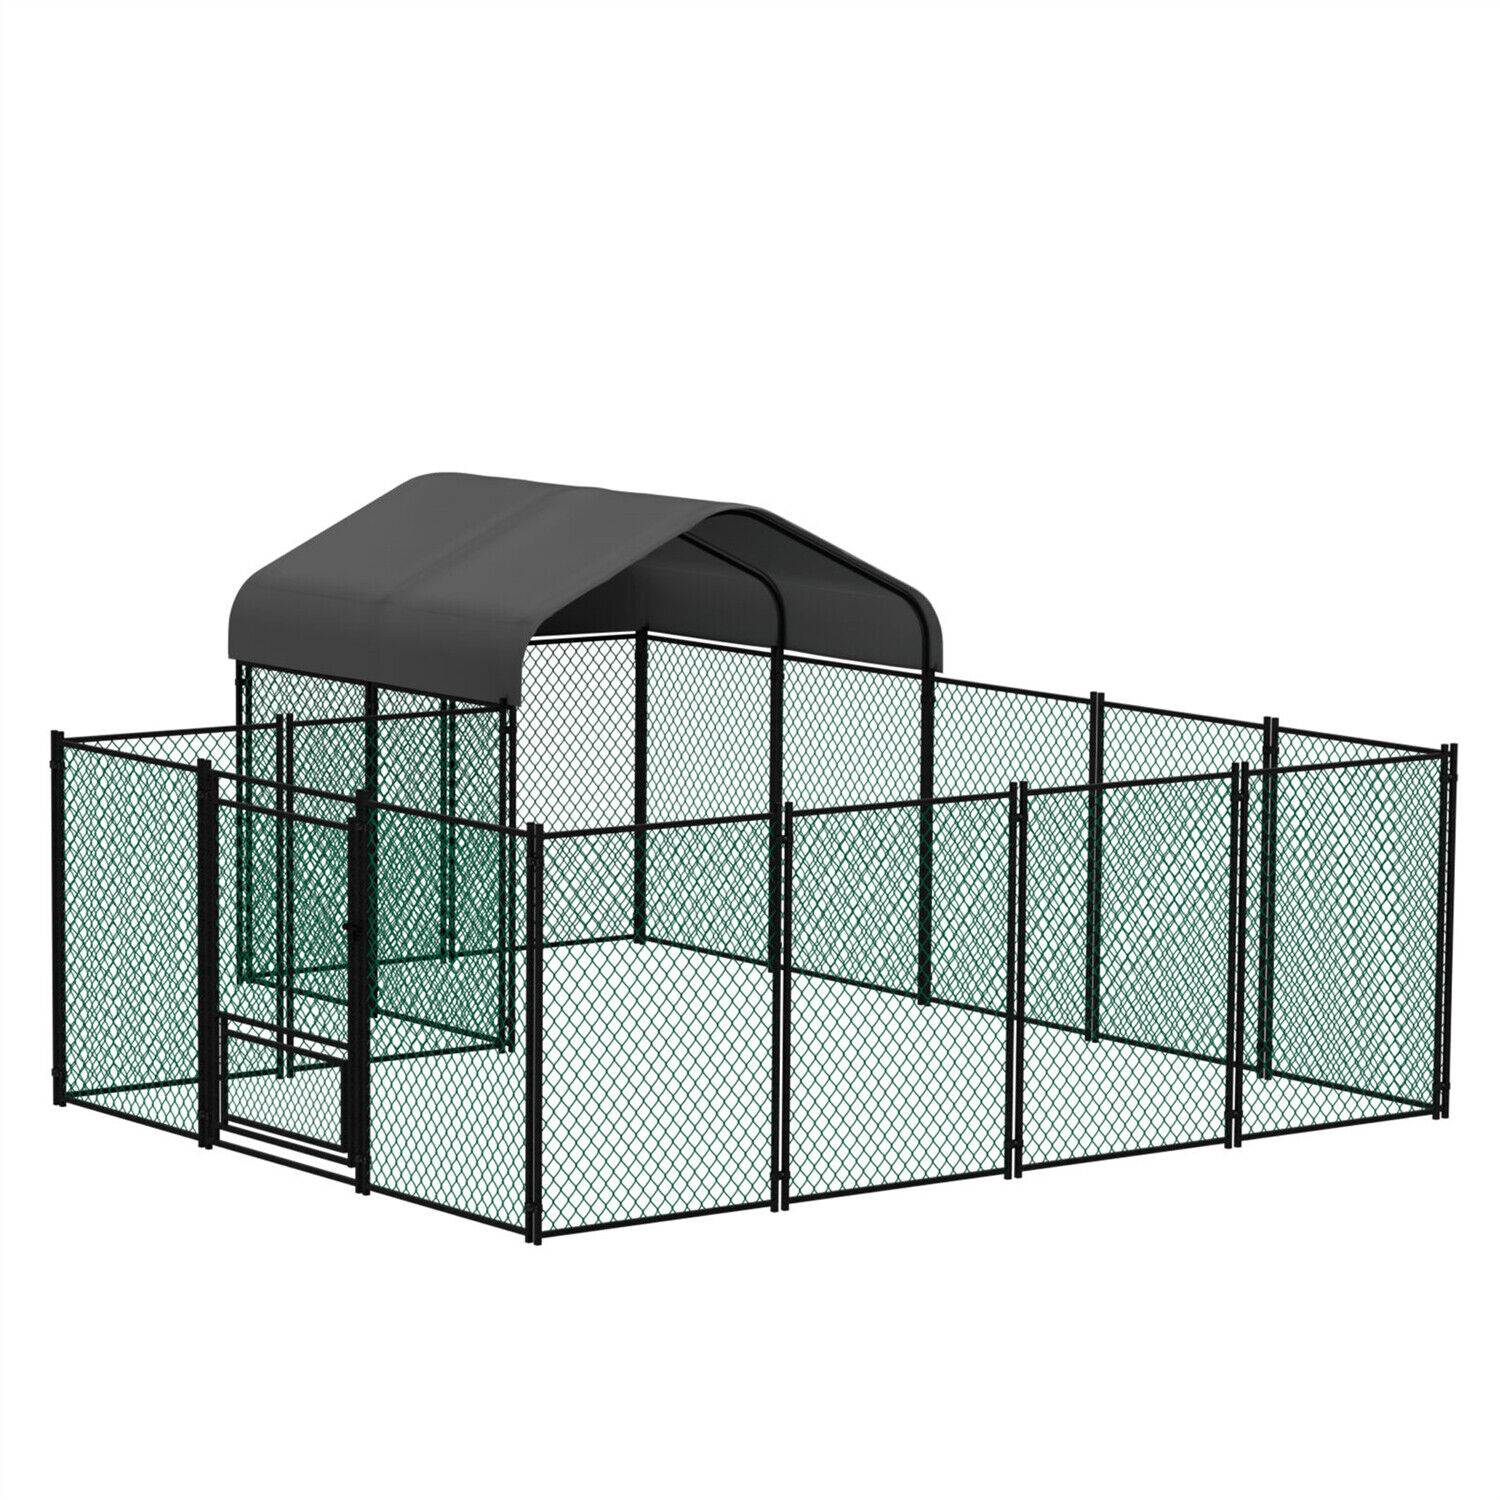 13FT Metal Chicken Coop Outdoor Walk-in Poultry Cage w/ Cover Pen Hen Run House